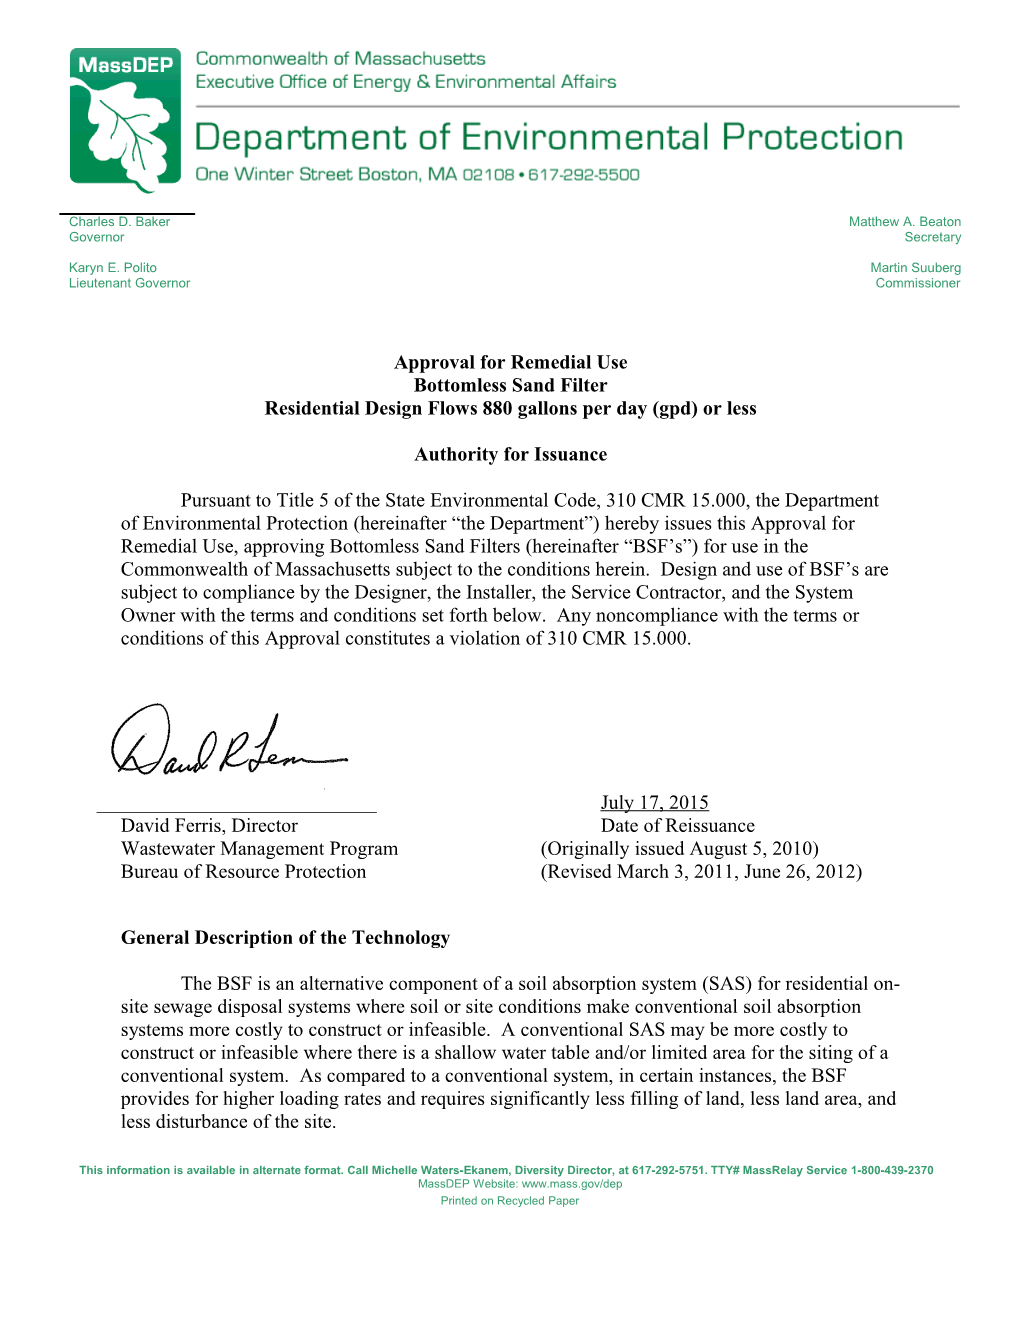 Approval for Remedial Use of the Bottomless Sand Filter ( BSF )Page 1 of 14